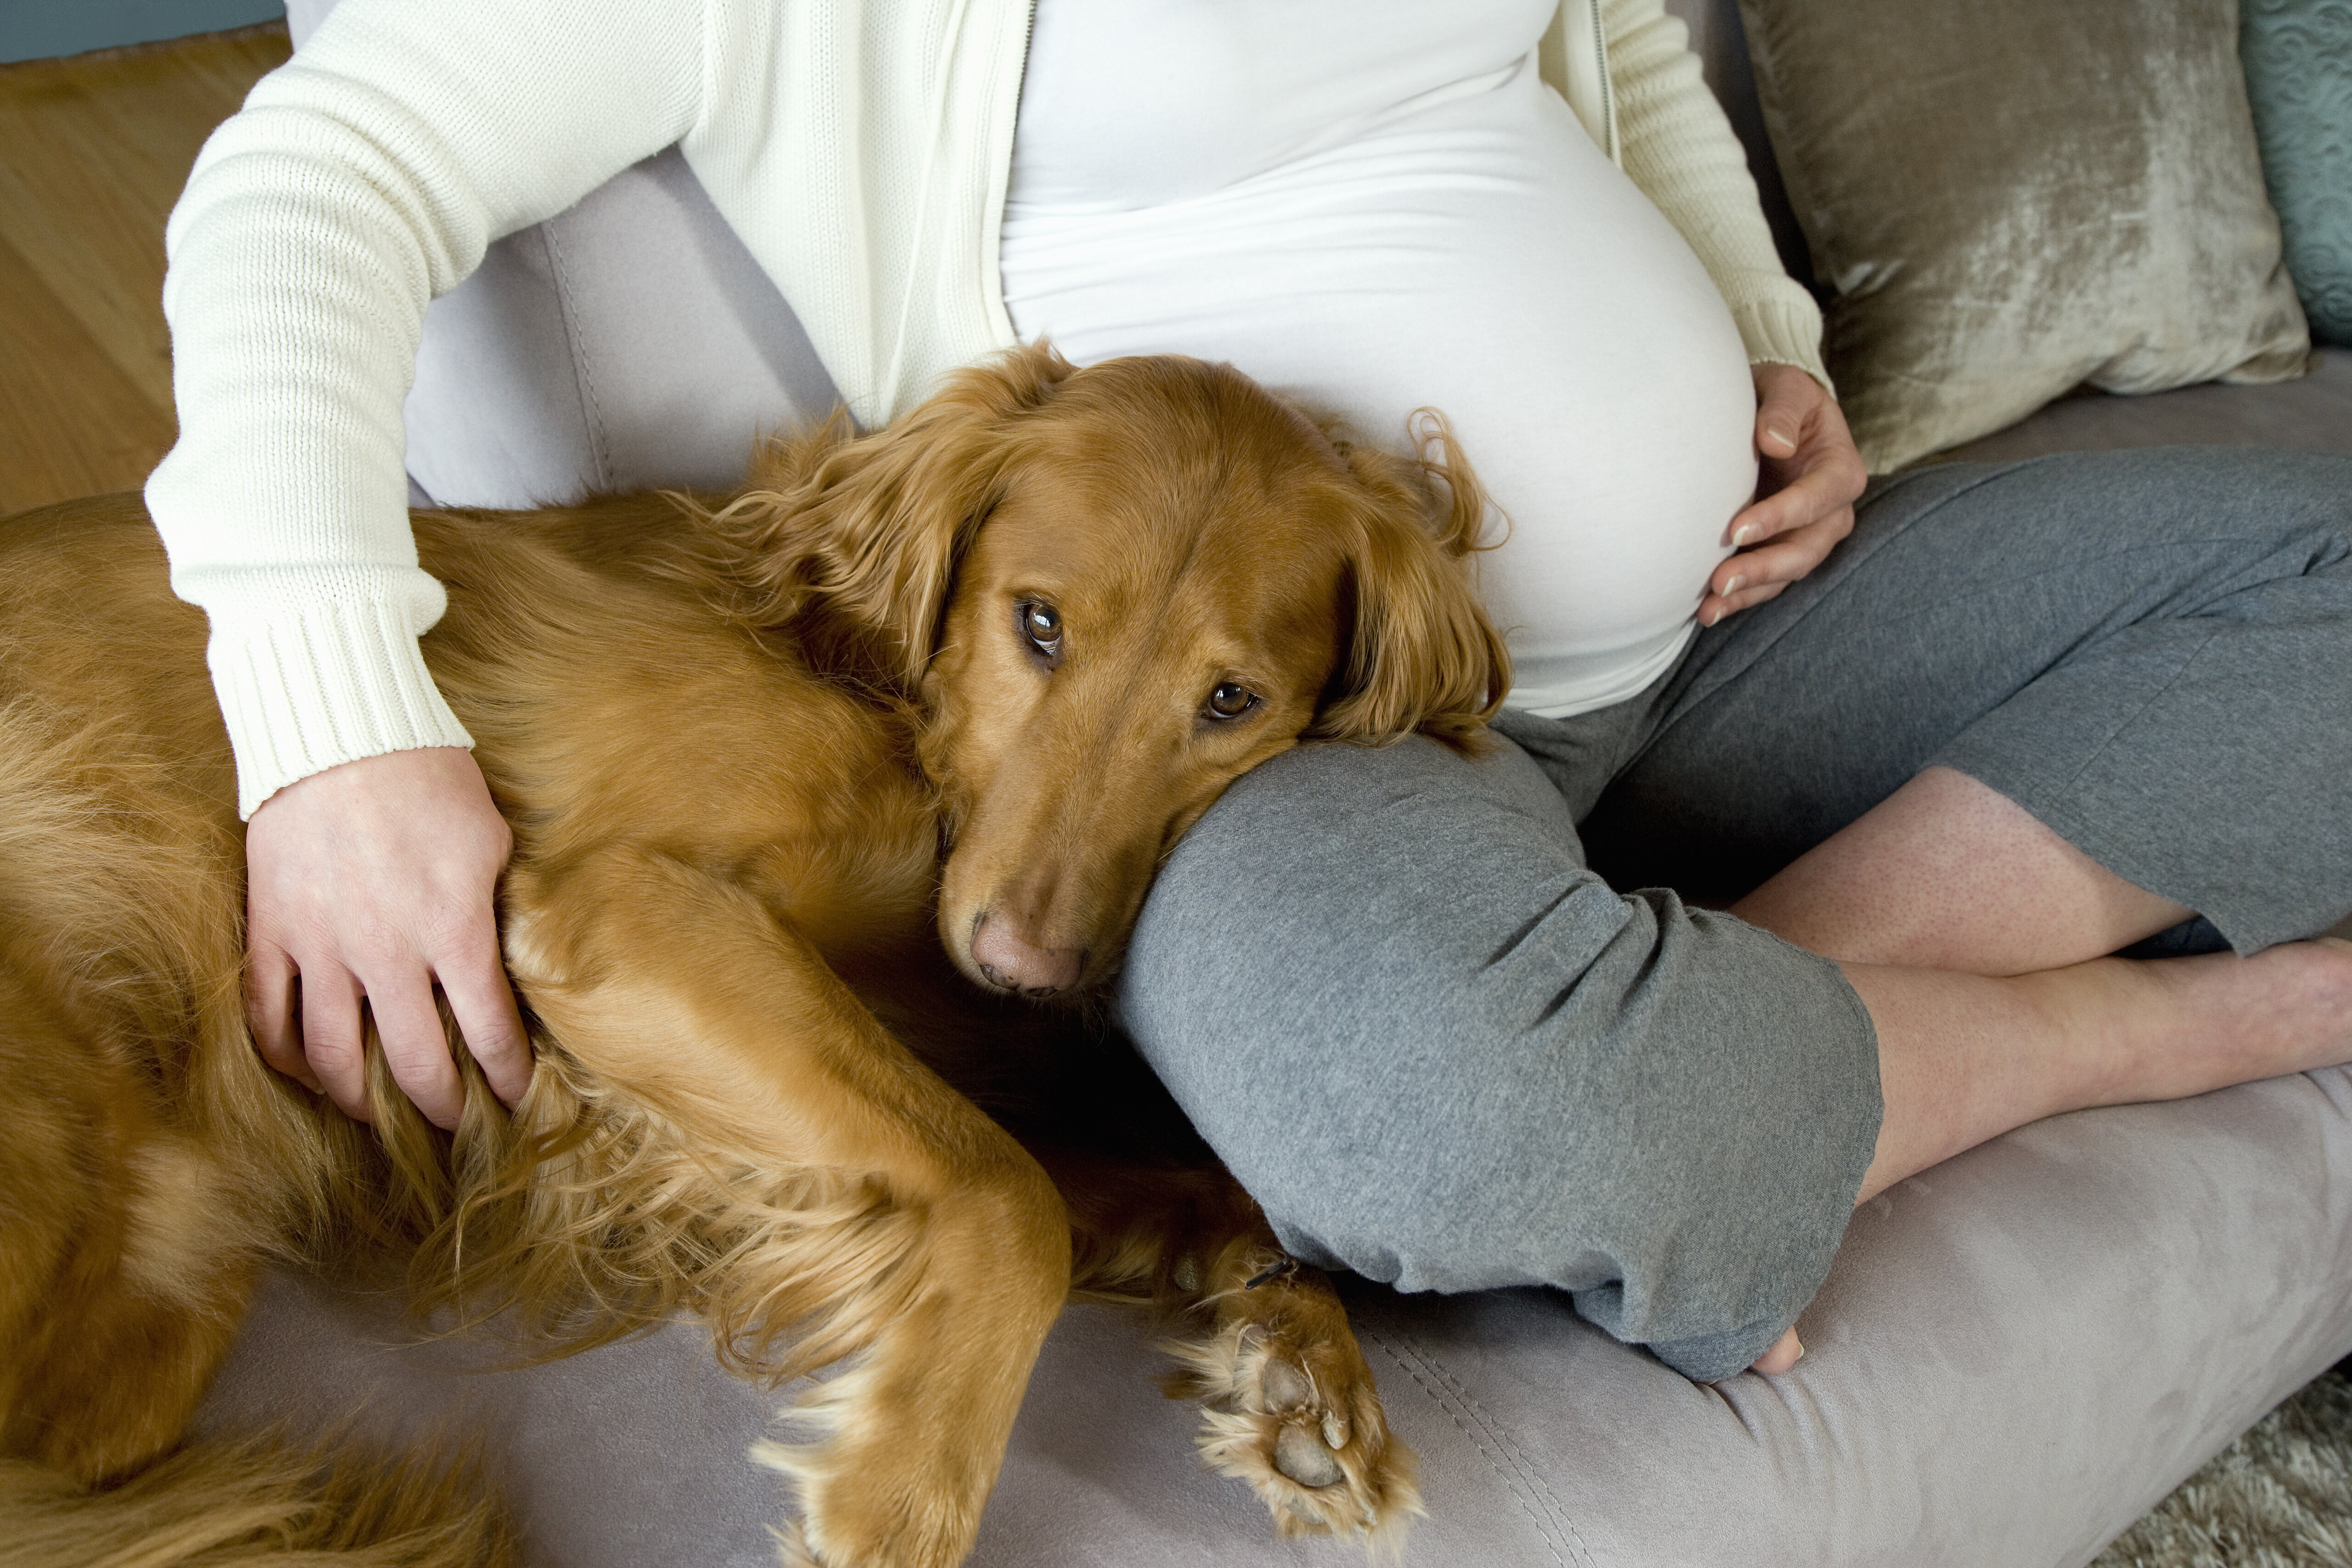 can a dog get a human pregnant